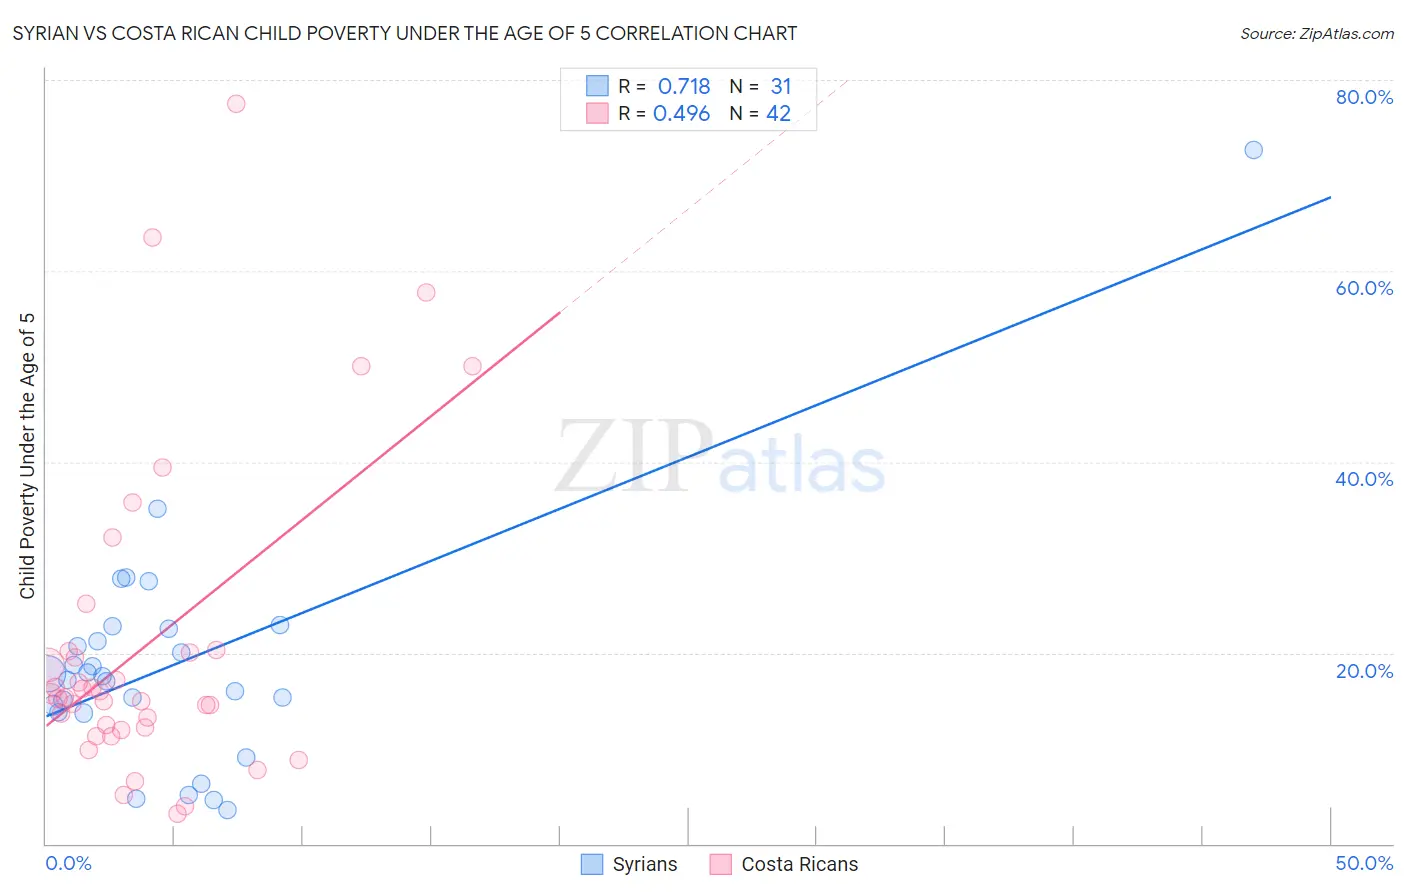 Syrian vs Costa Rican Child Poverty Under the Age of 5